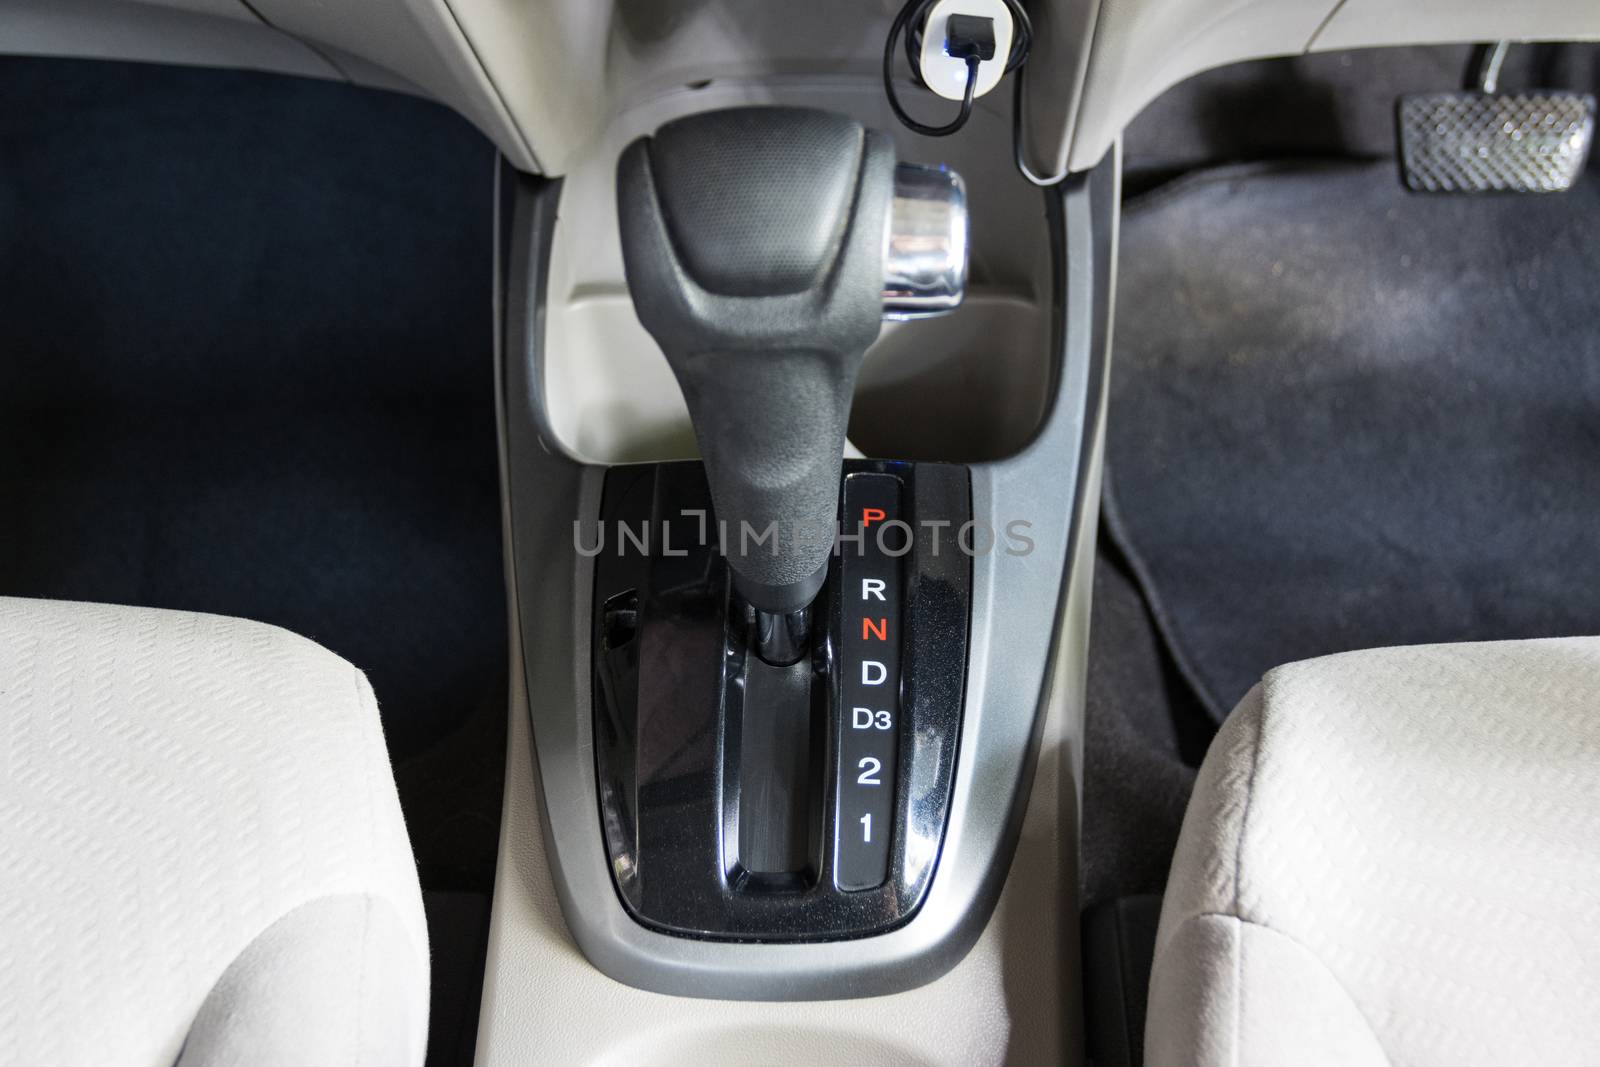 Closeup Gear N:-  Neutral Gear in Automatic Transmission and rear wheels, permitting the car to roll freely 